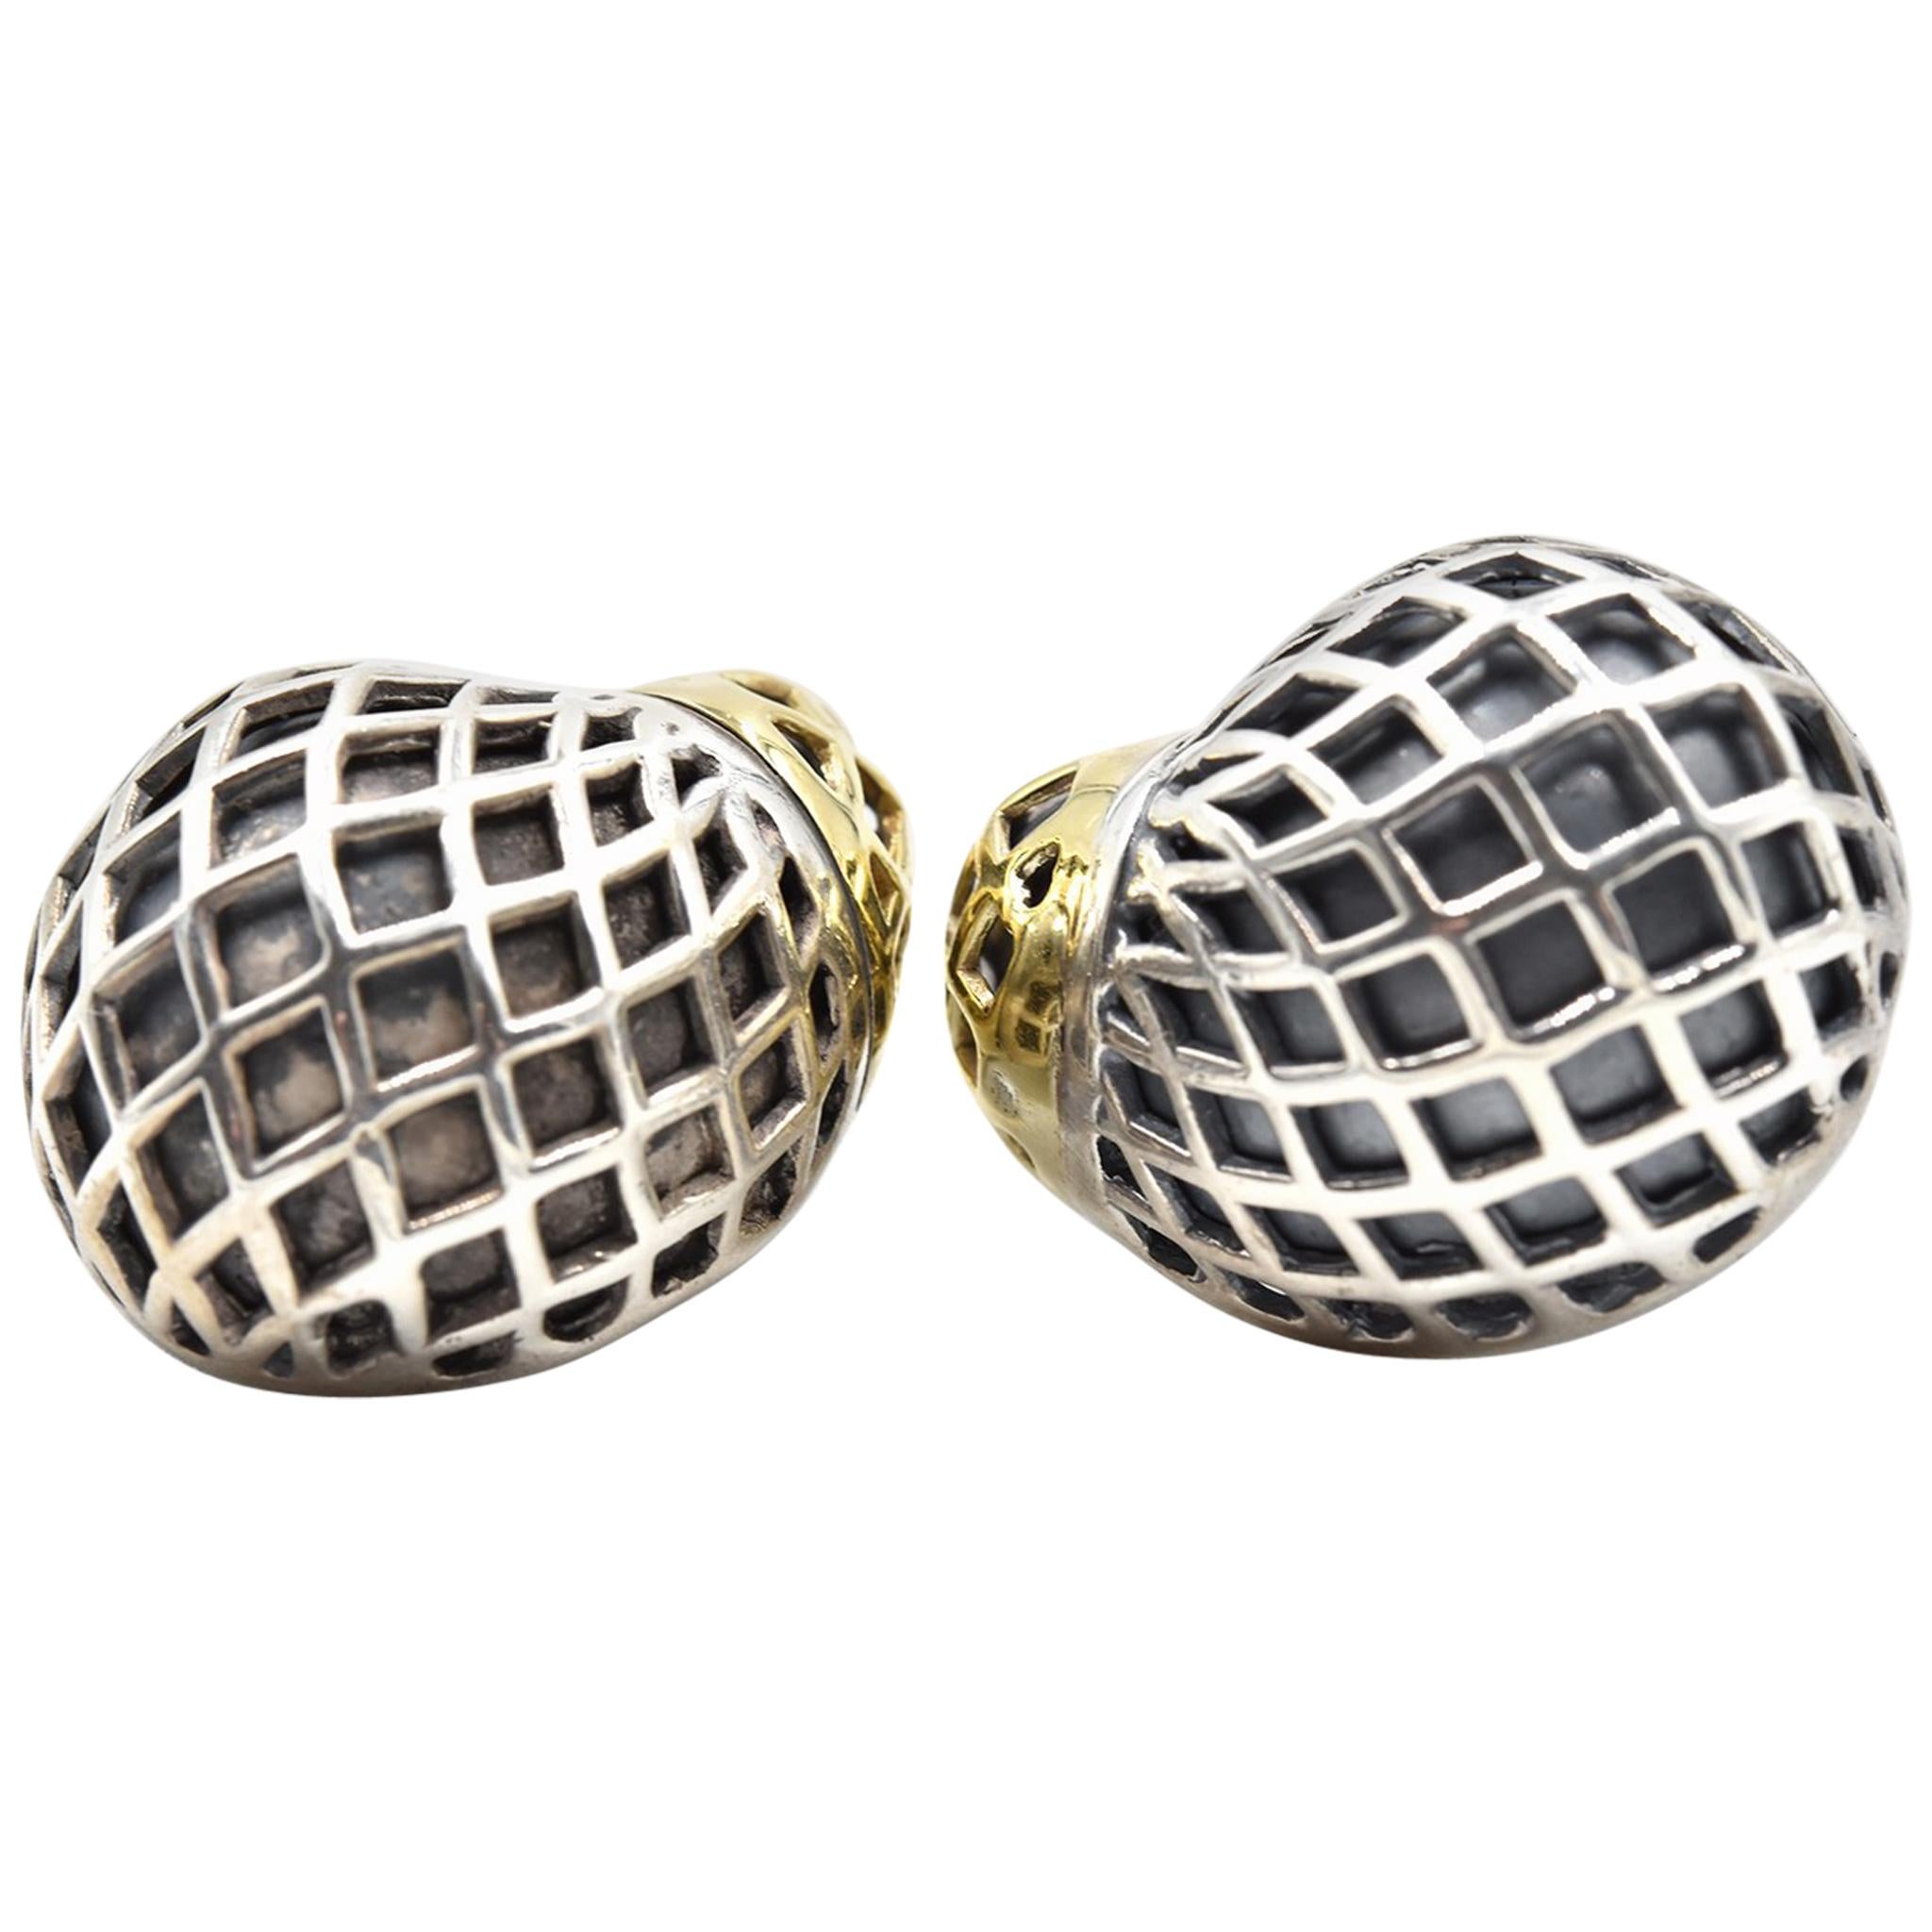 David Wysor Sterling Silver and Gold-Tone Earrings